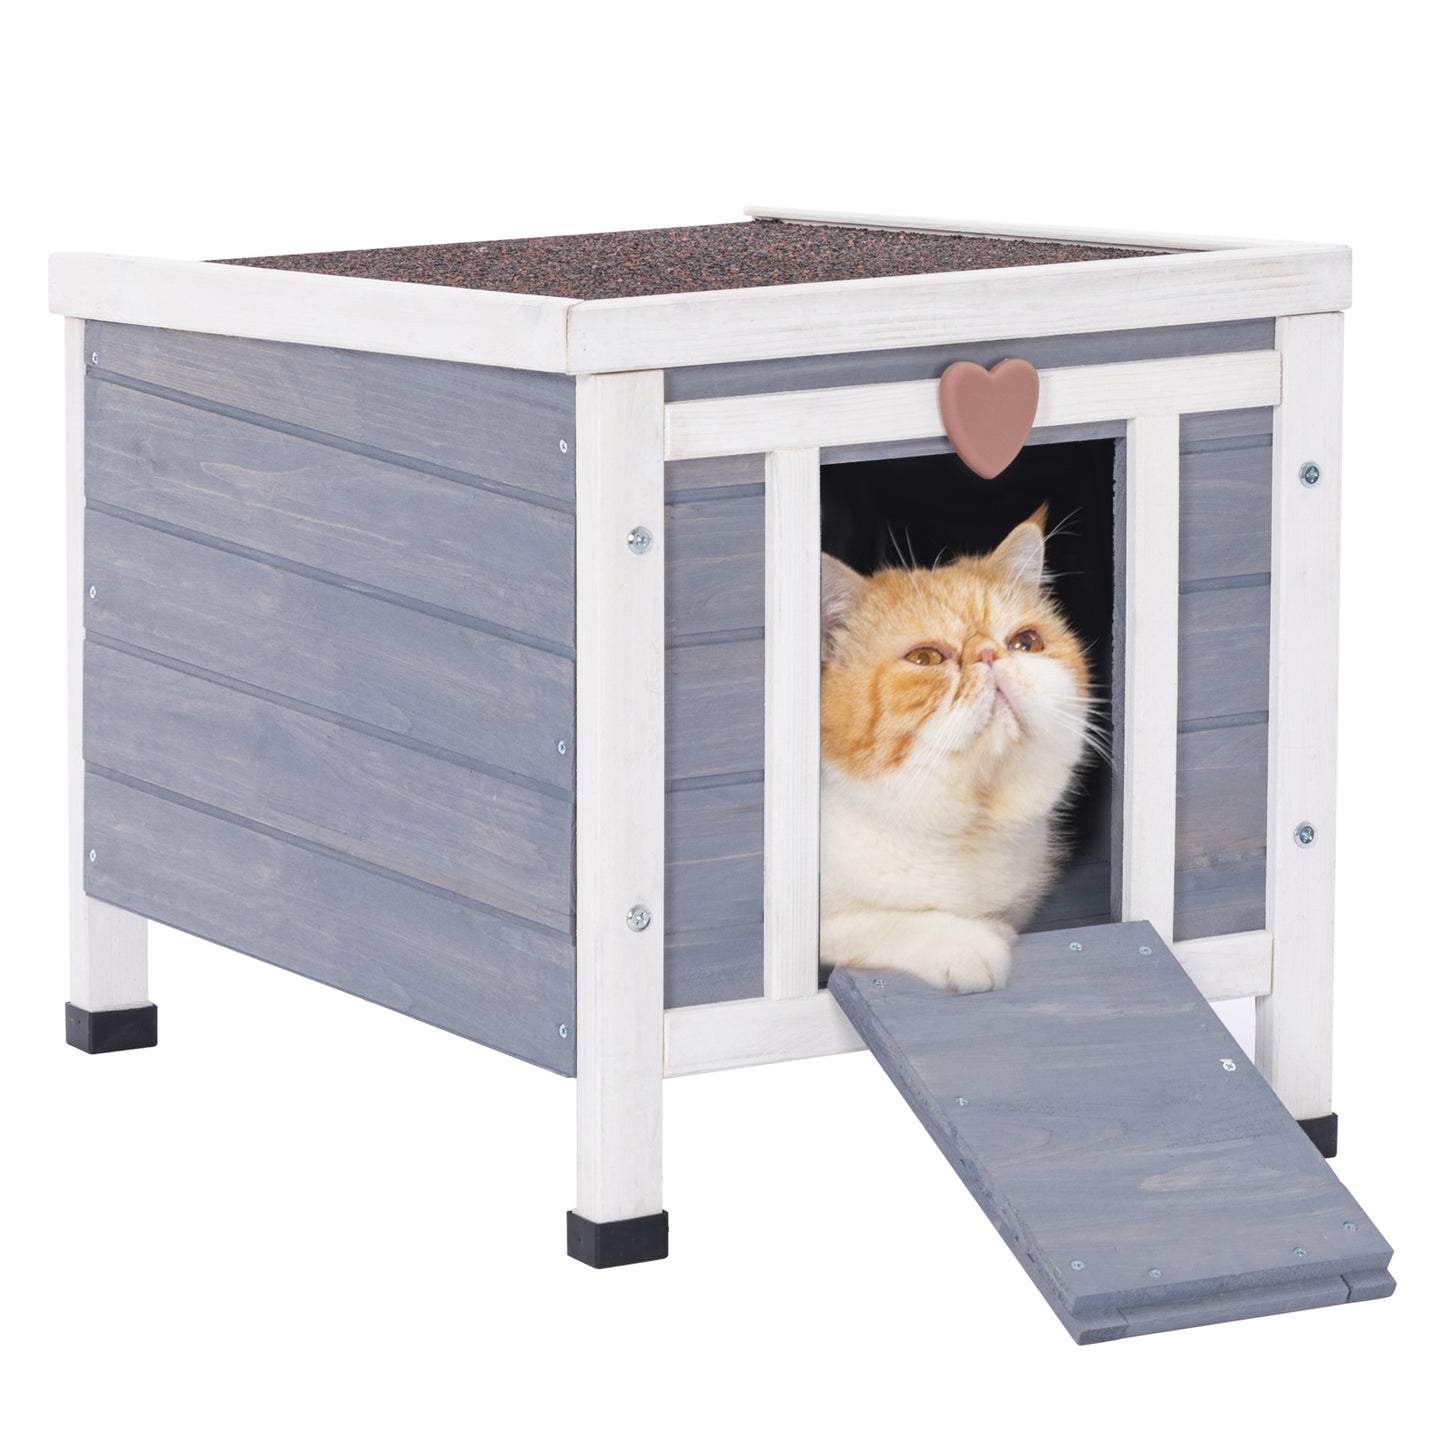 Outdoor-Cat-House-Higher-Feet-to-Against-Rain-and-Snow-02